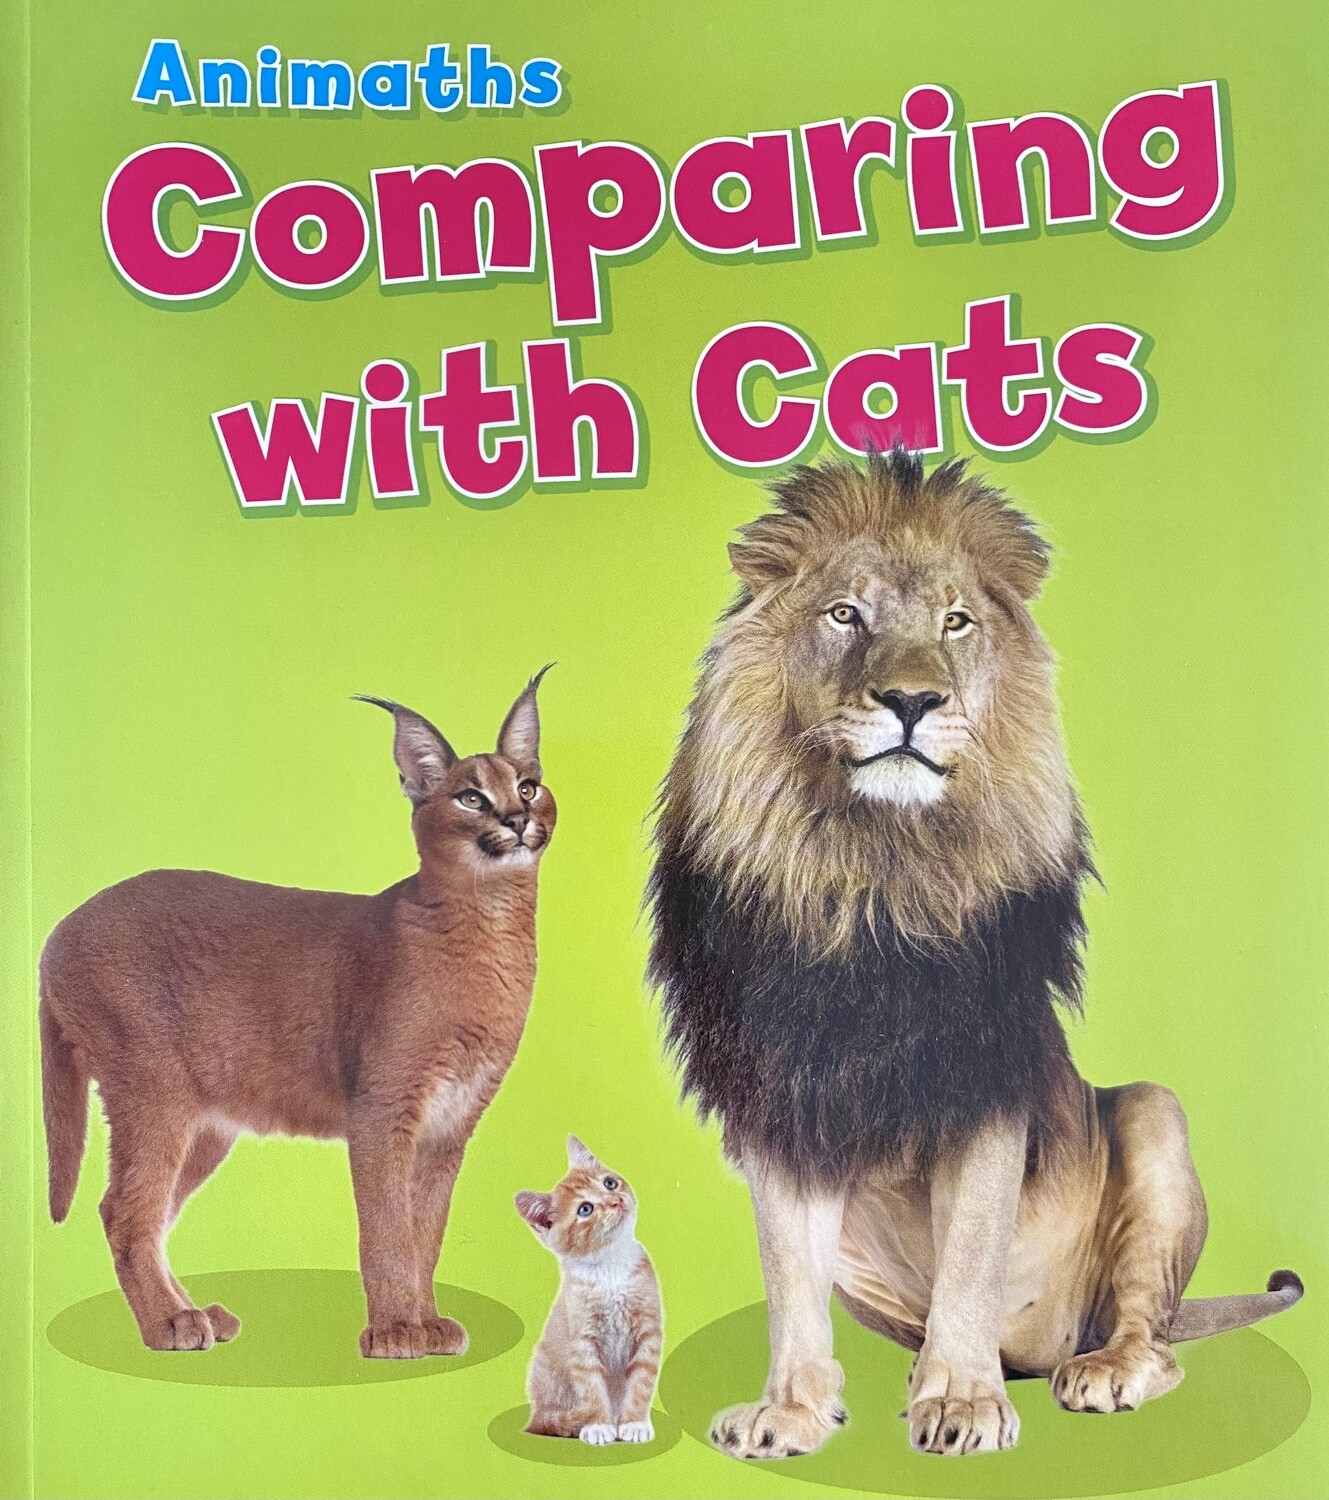 Animaths: Comparing with Cats